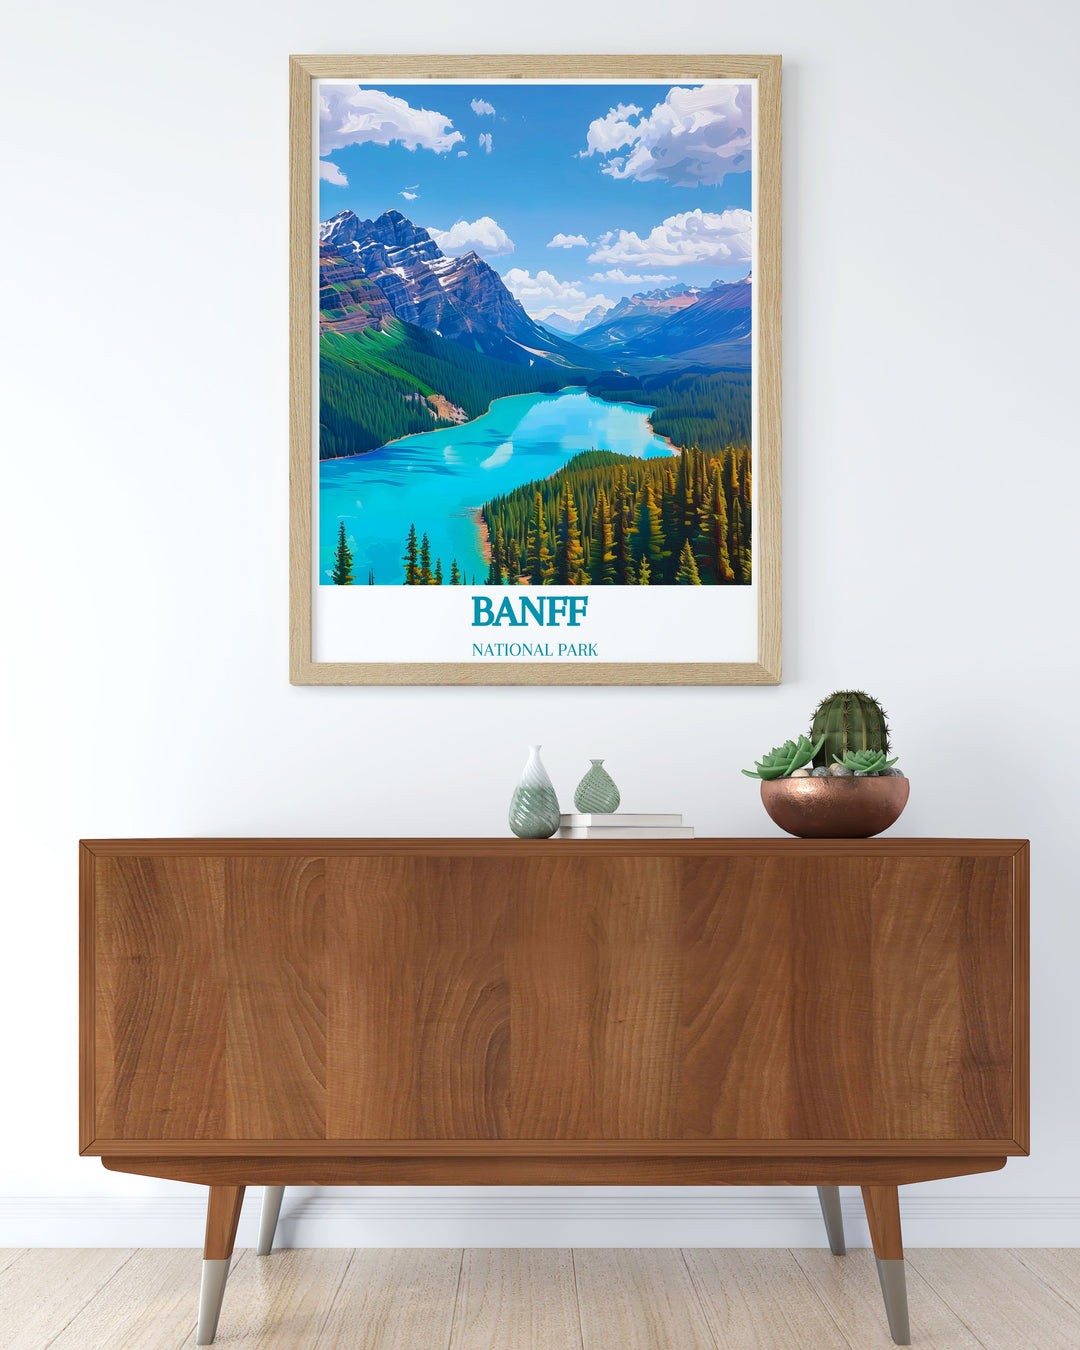 Peyto Lake wall decor displaying where the vivid blue waters meet lush green forests, offering a breathtaking view of one of Albertas most beautiful natural scenes, ideal for adding a touch of Canadas pristine beauty to any room.